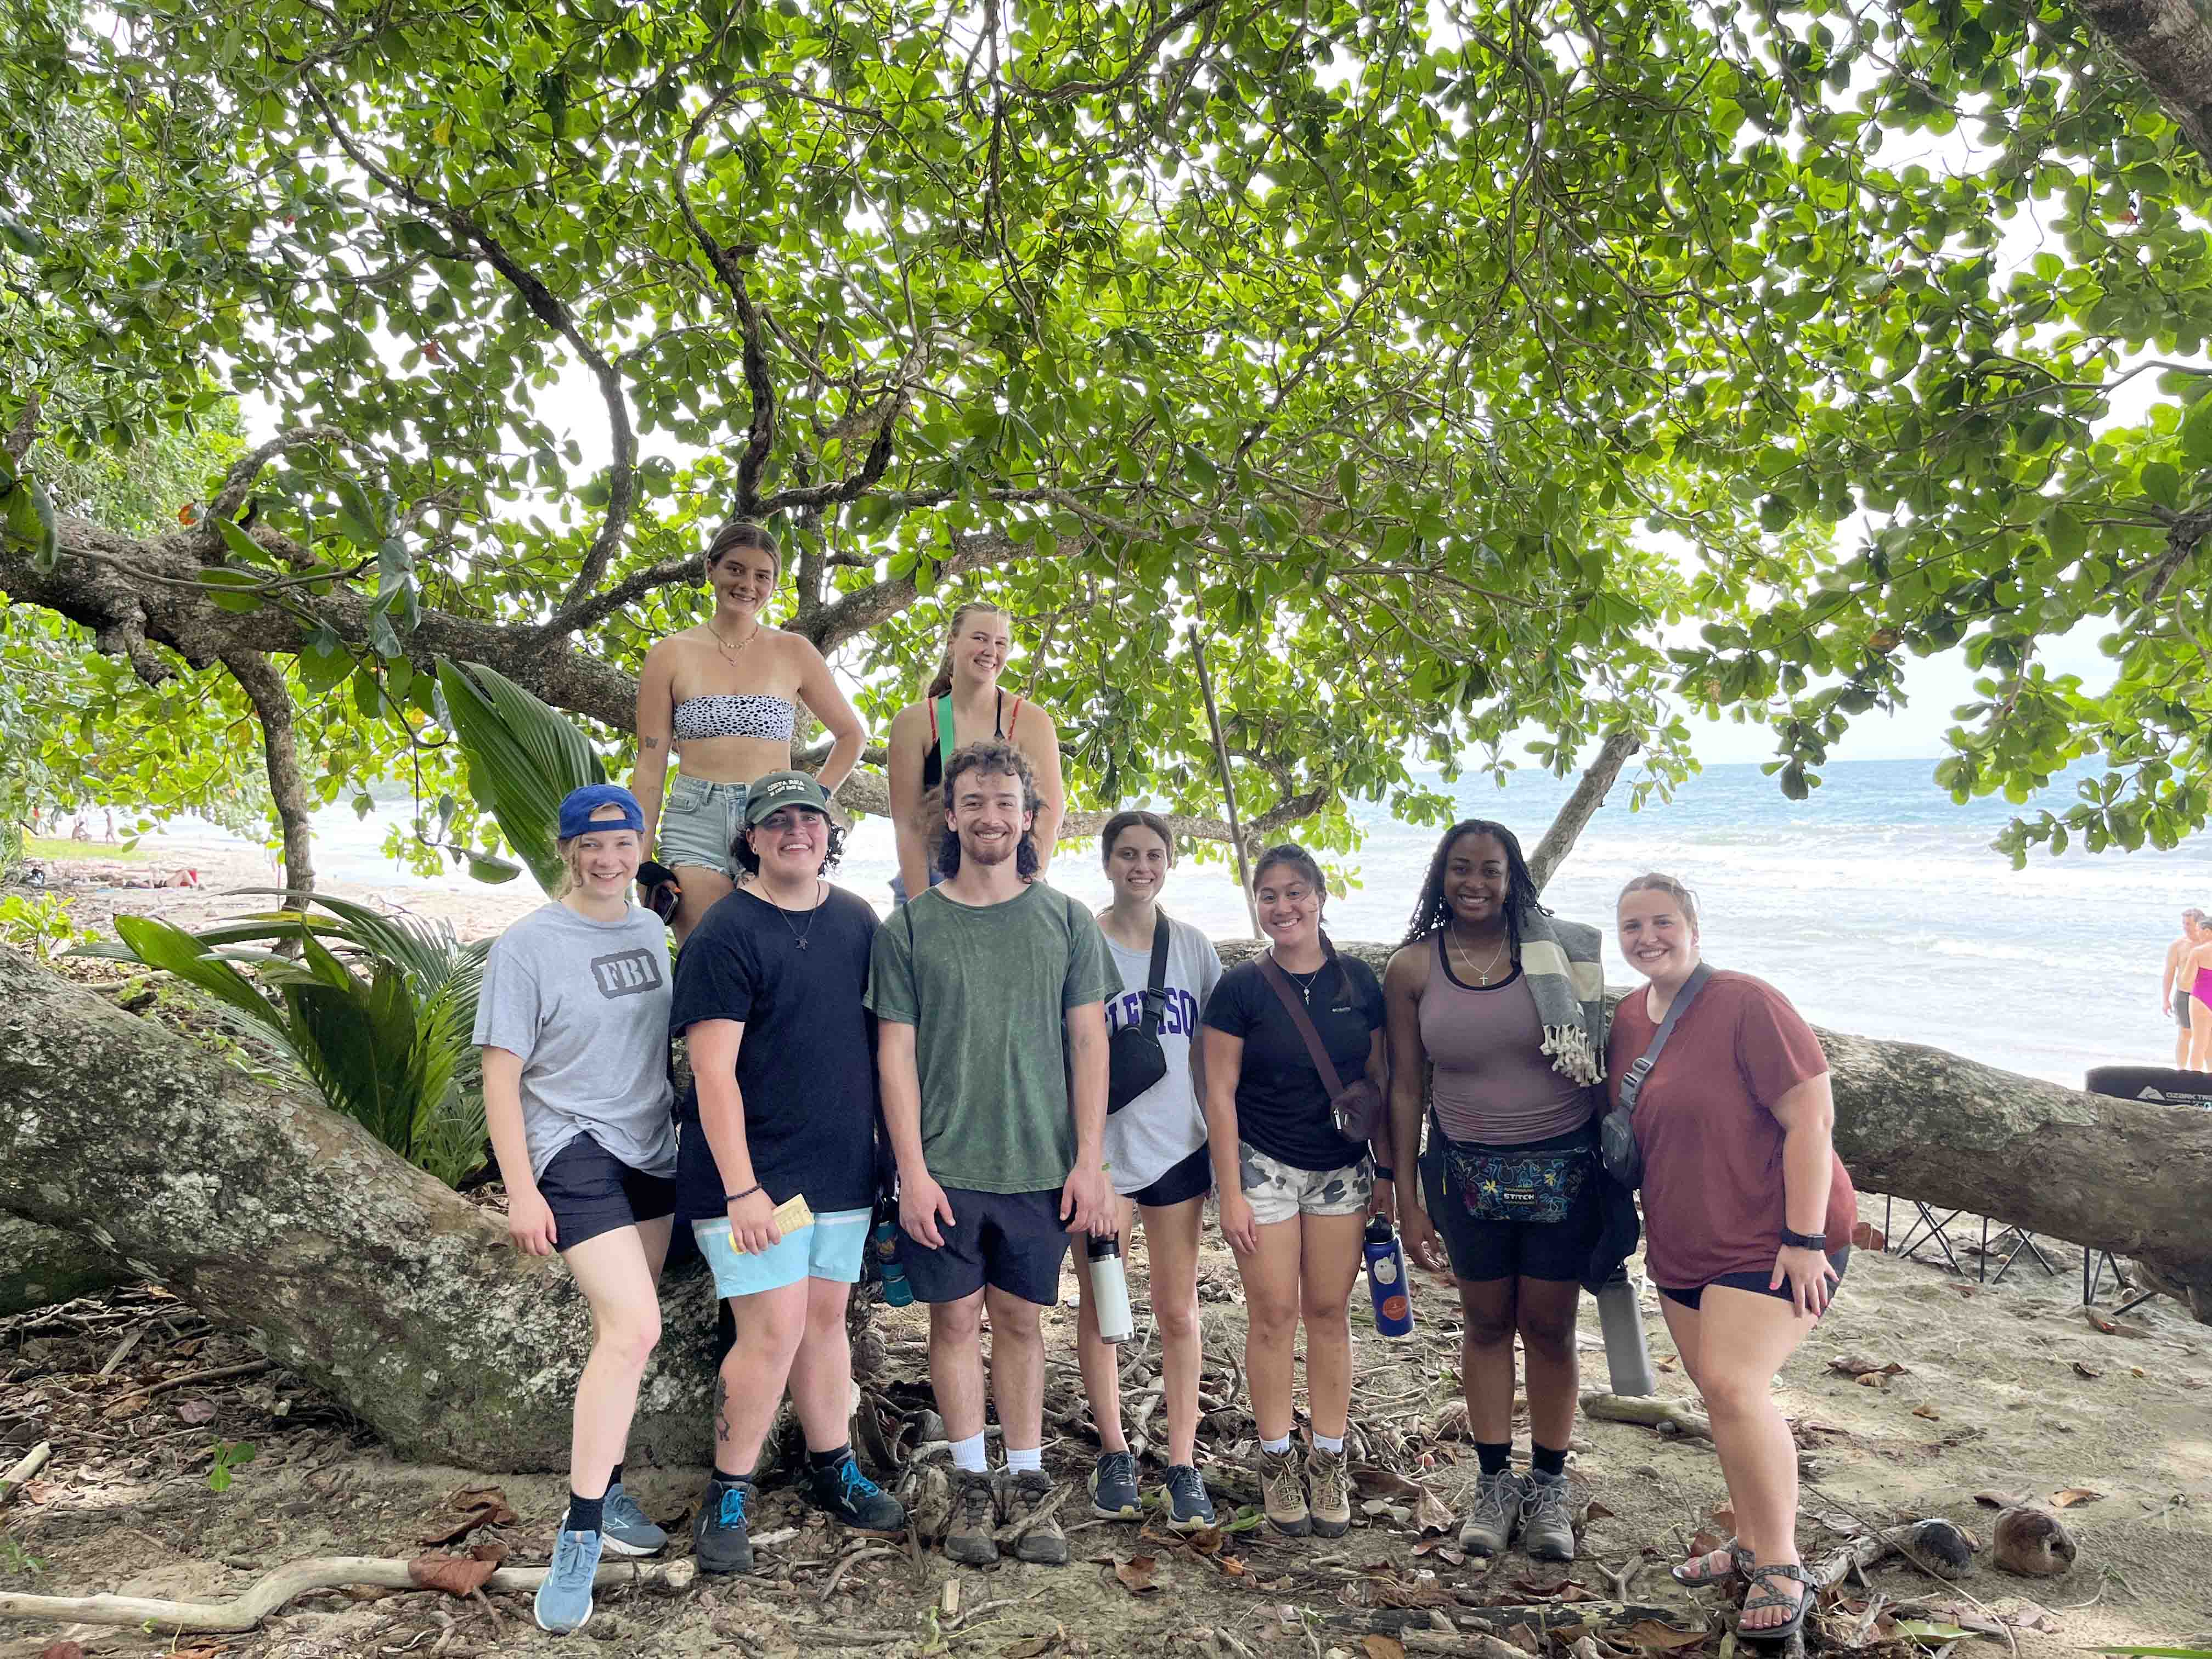 Students at the beach in Costa Rica